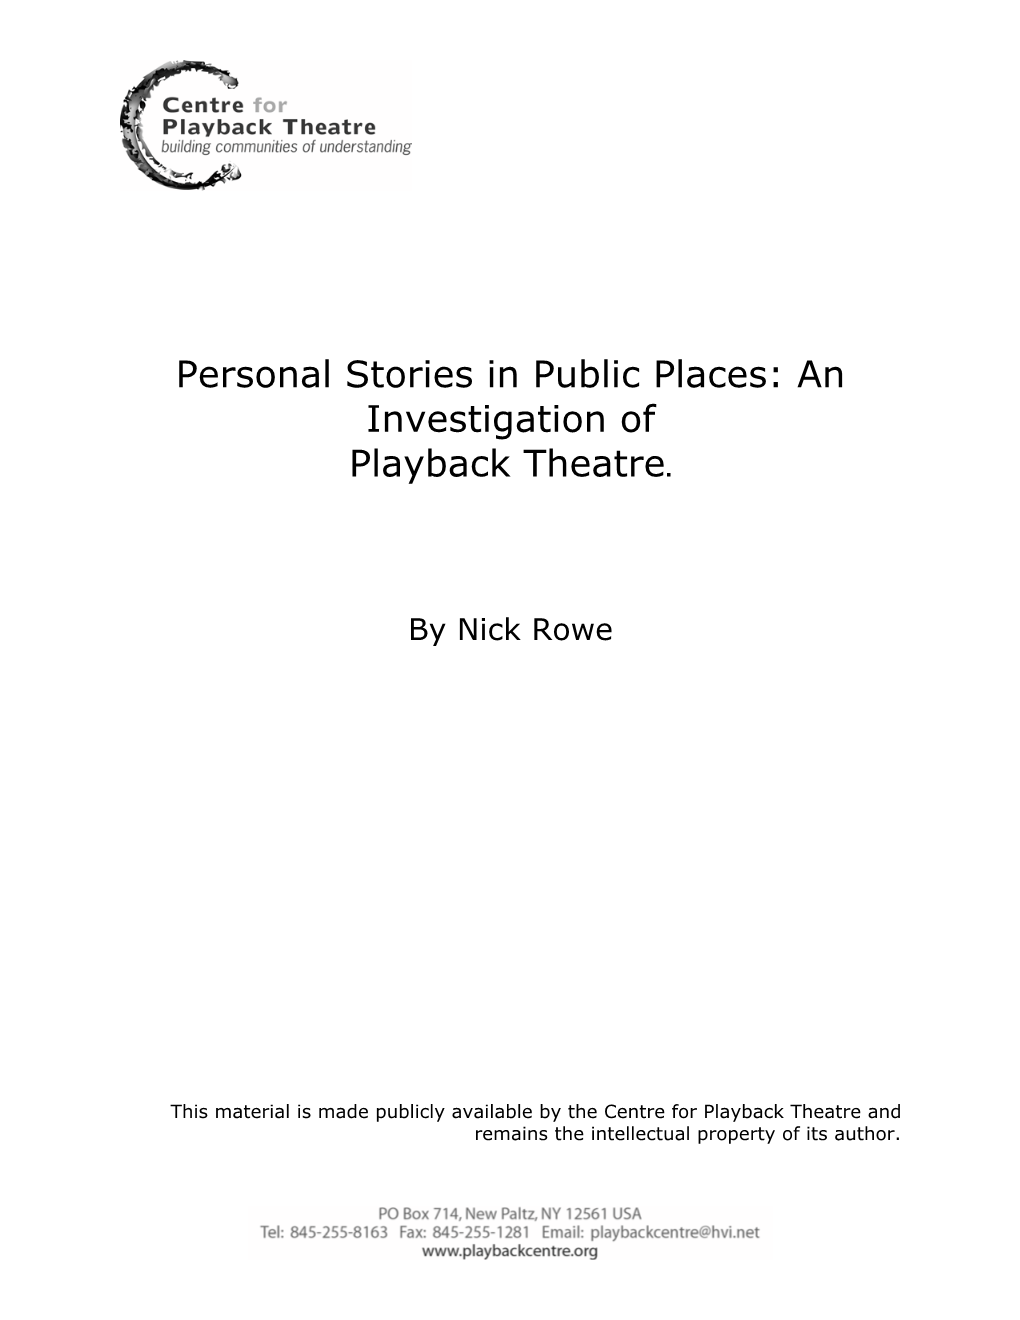 Personal Stories in Public Places: an Investigation of Playback Theatre